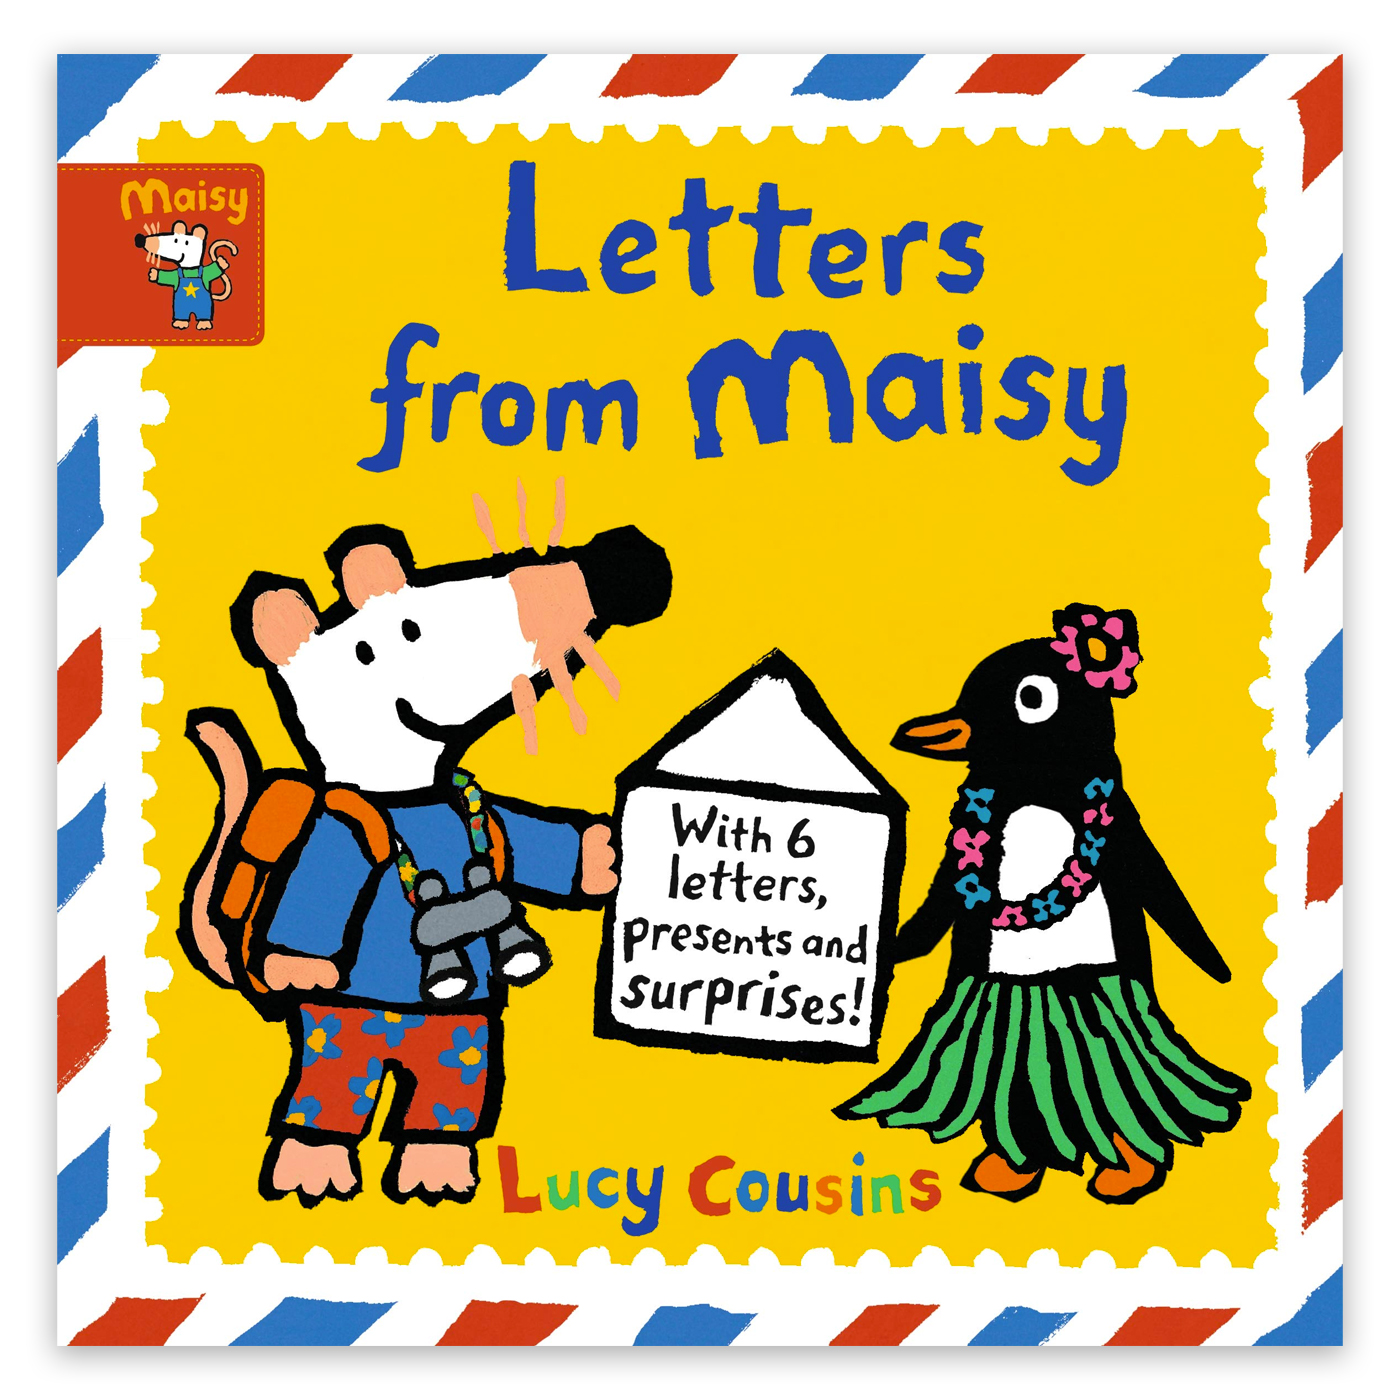  Maisys Letters From Maisy